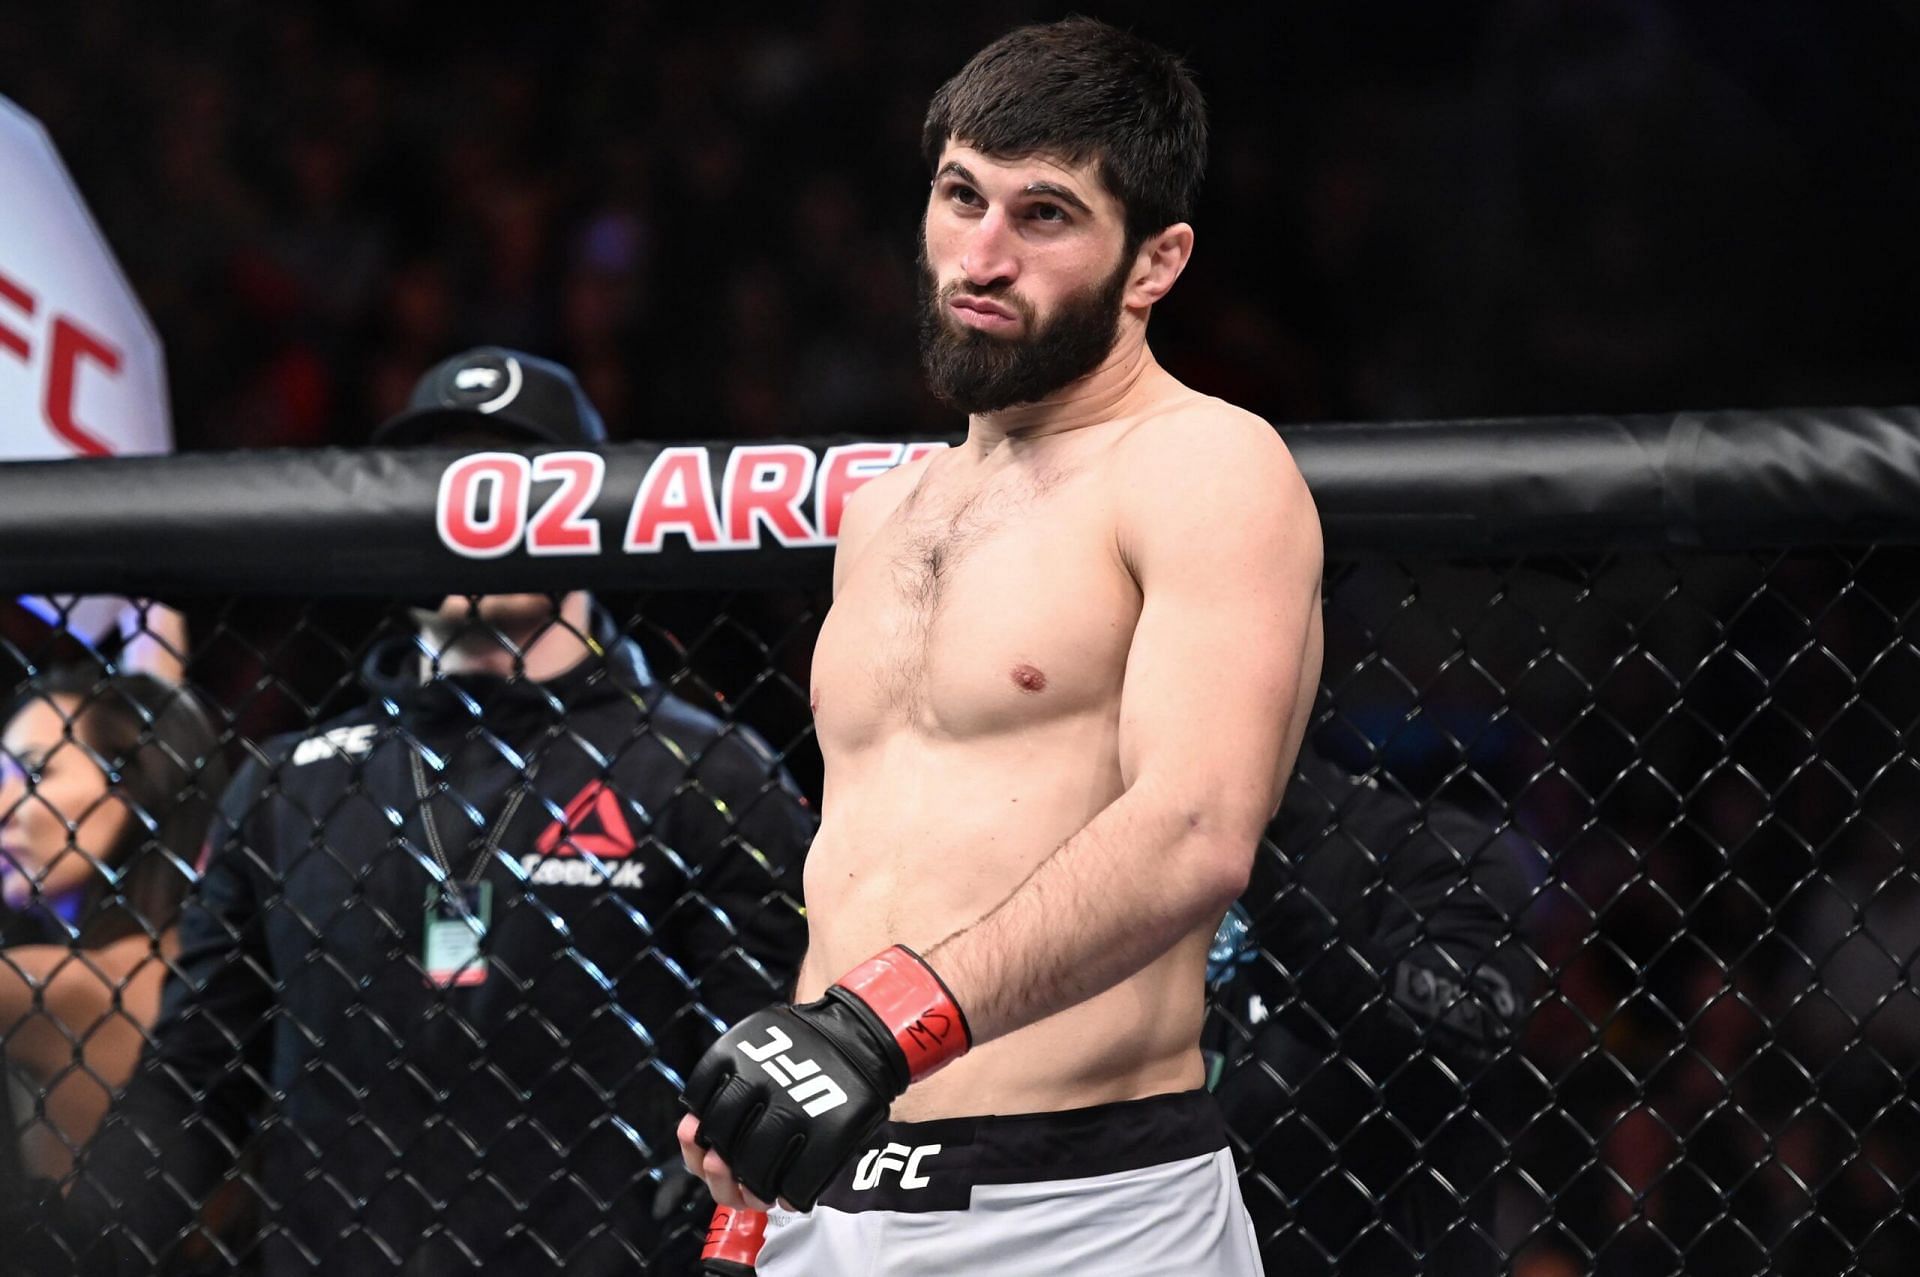 Magomed Ankalaev could claim a title shot with a victory over Thiago Santos this weekend